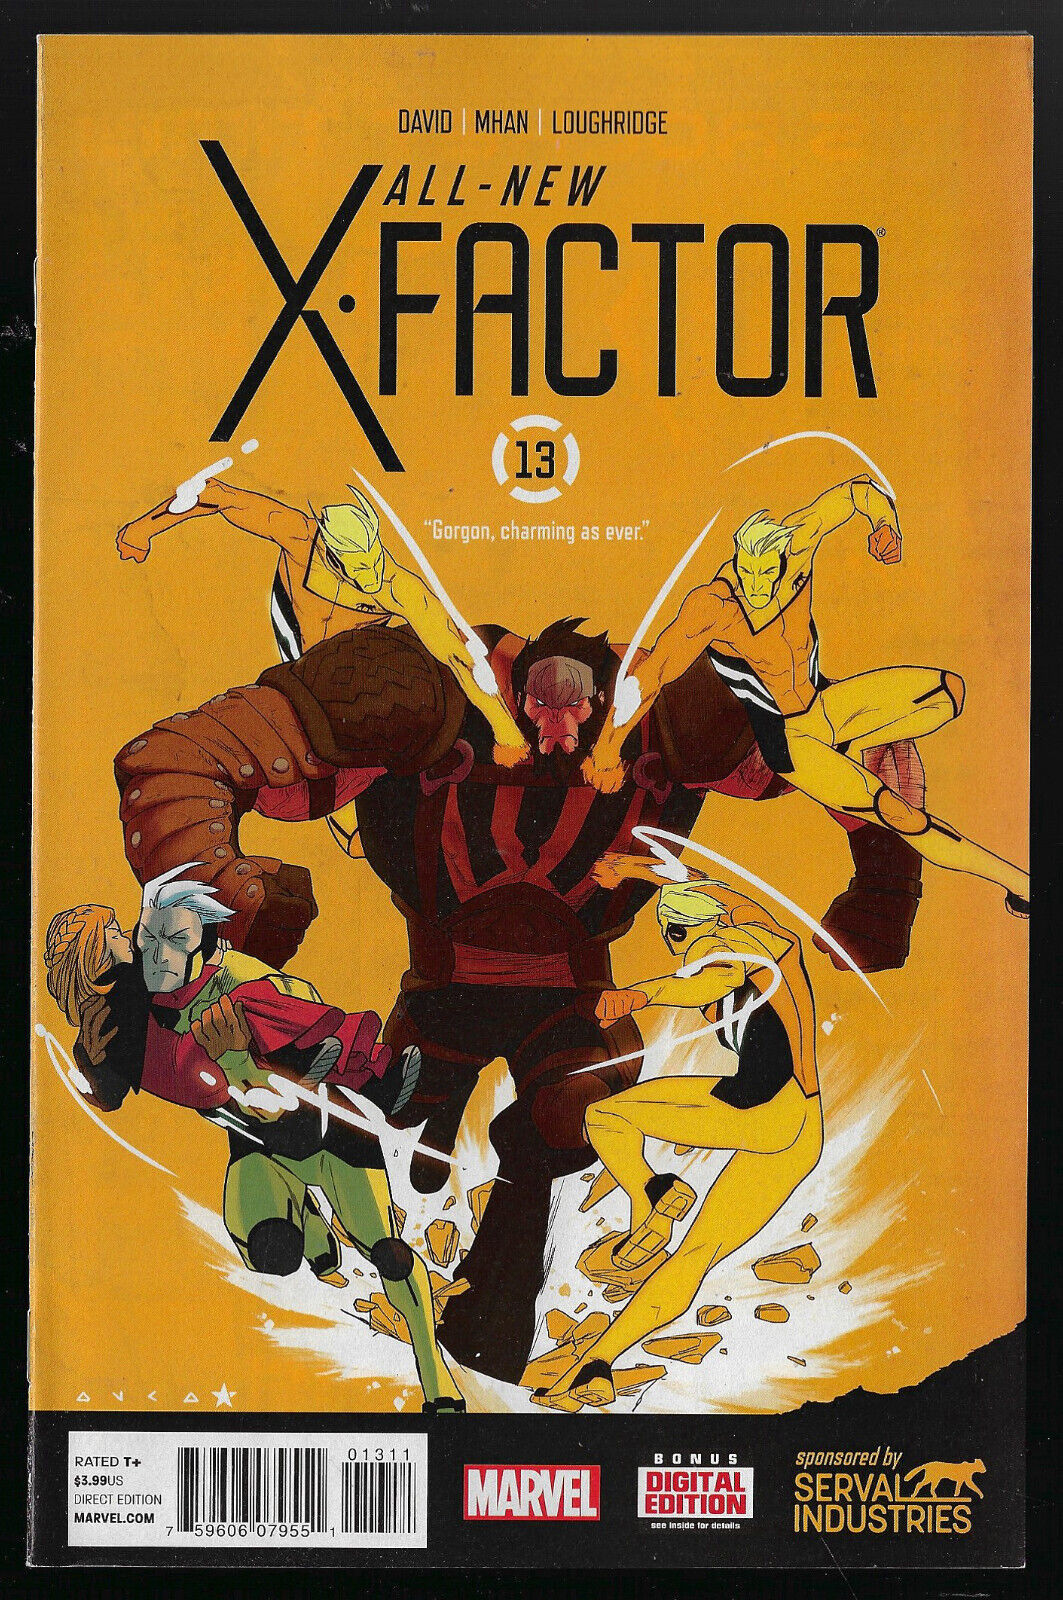 All-New X-Factor #13 - Marvel, 2014  $5 ships unlimited comics